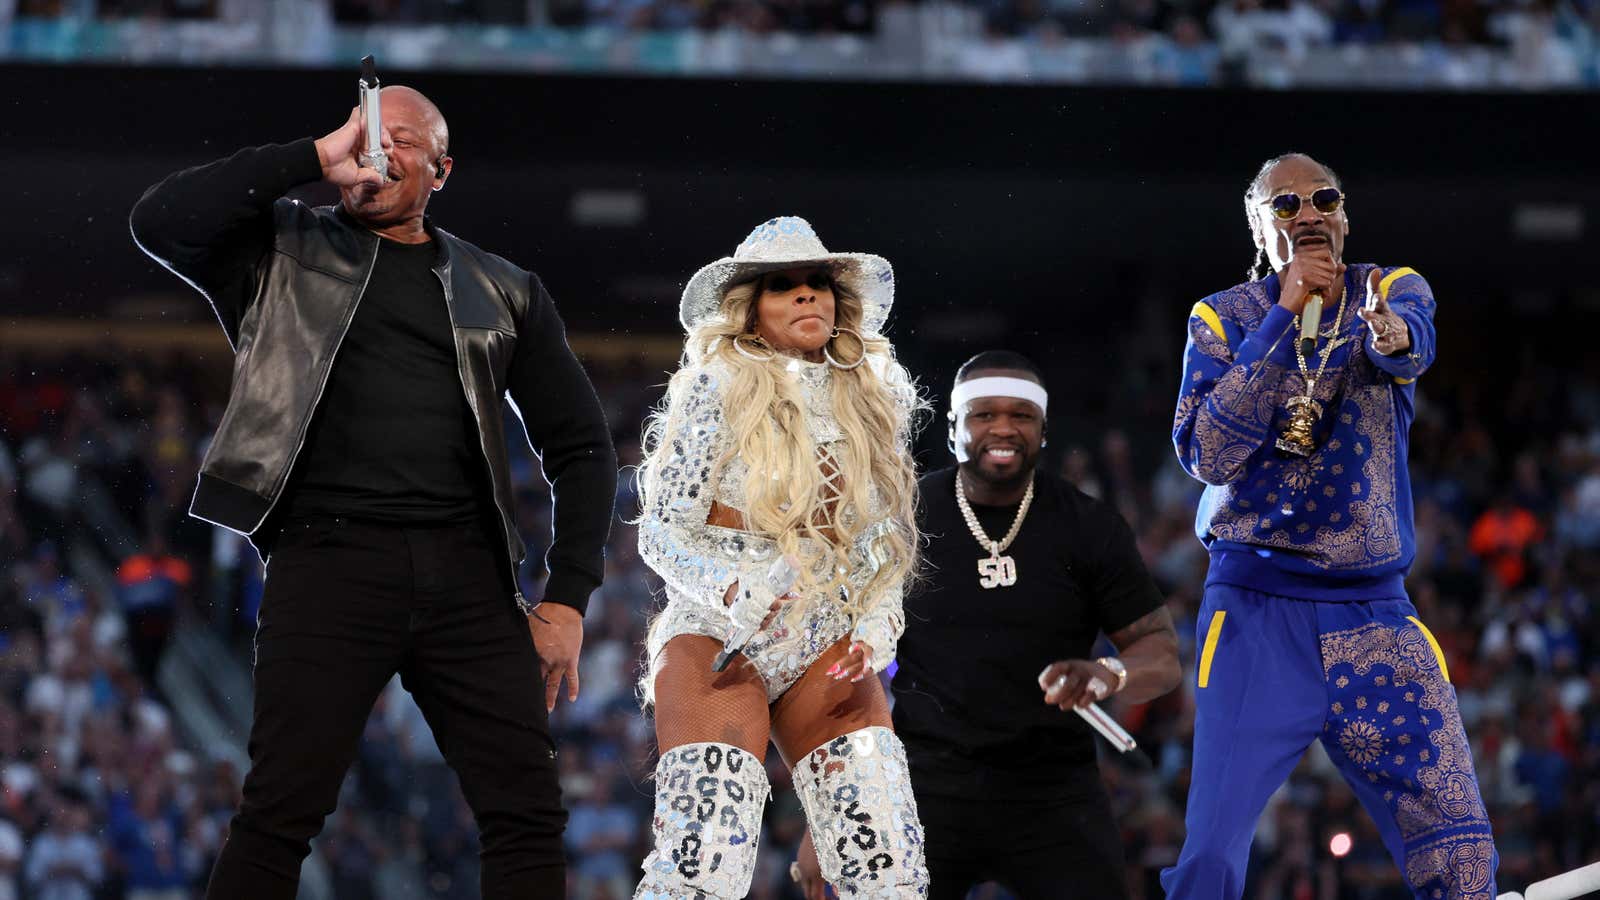 Dr. Dre, Mary J. Blige, 50 Cent, and Snoop Dogg at Super Bowl LVI.